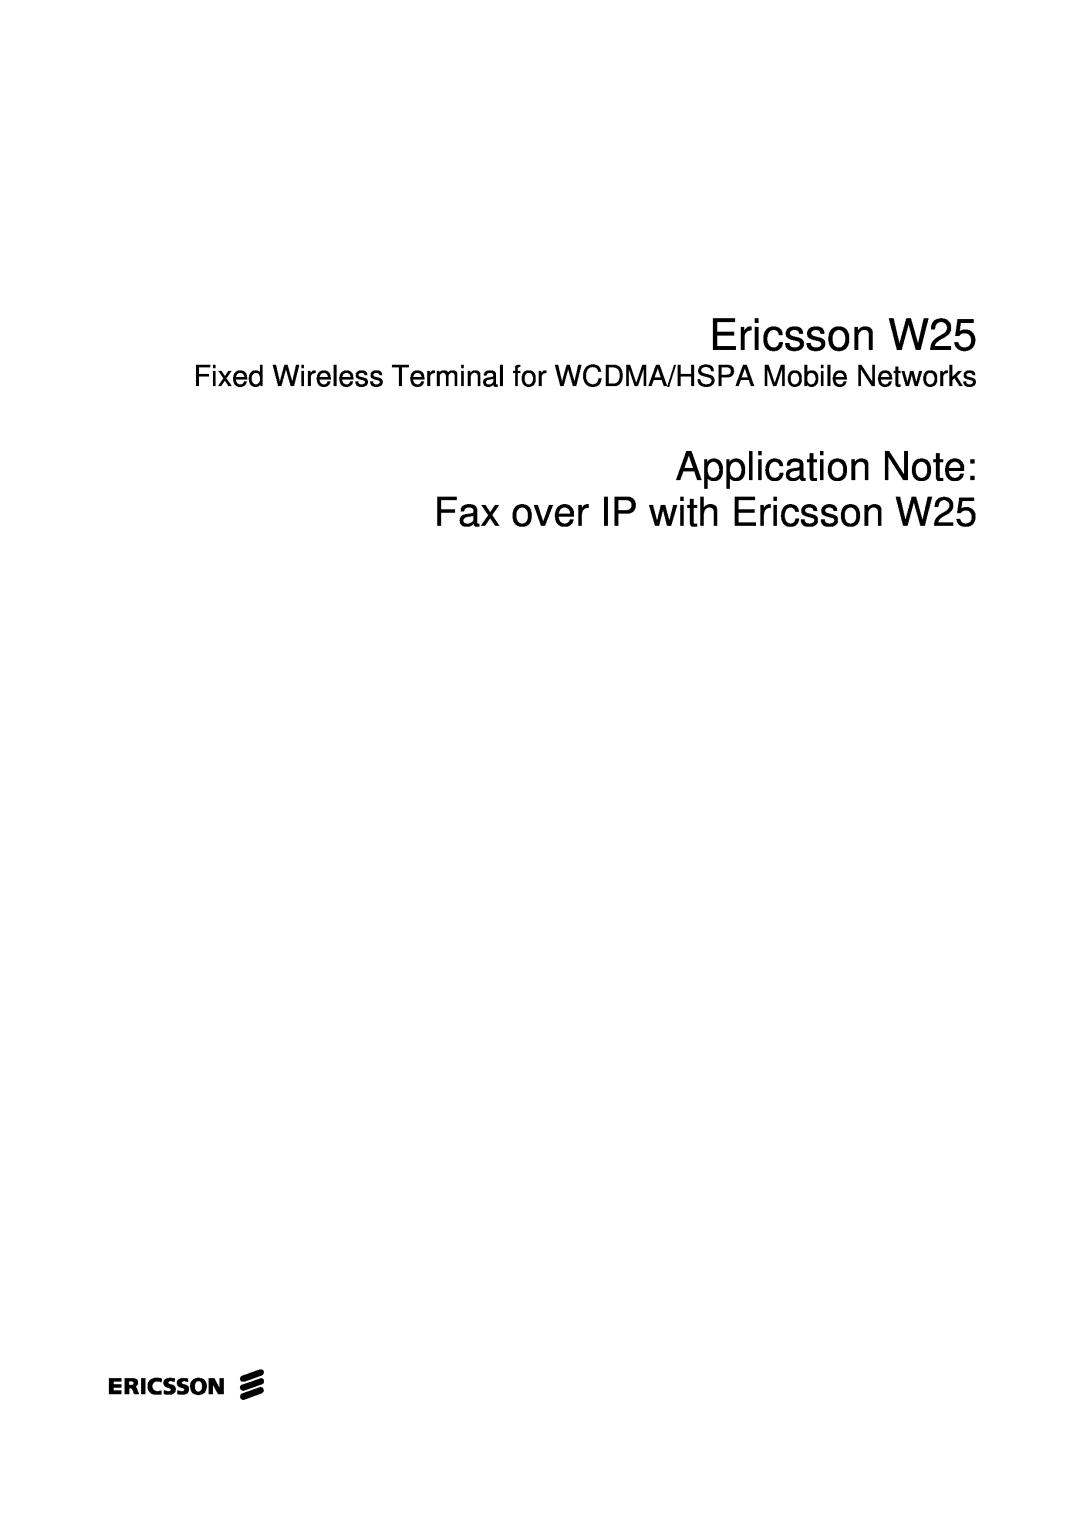 Compaq manual Application Note Fax over IP with Ericsson W25 